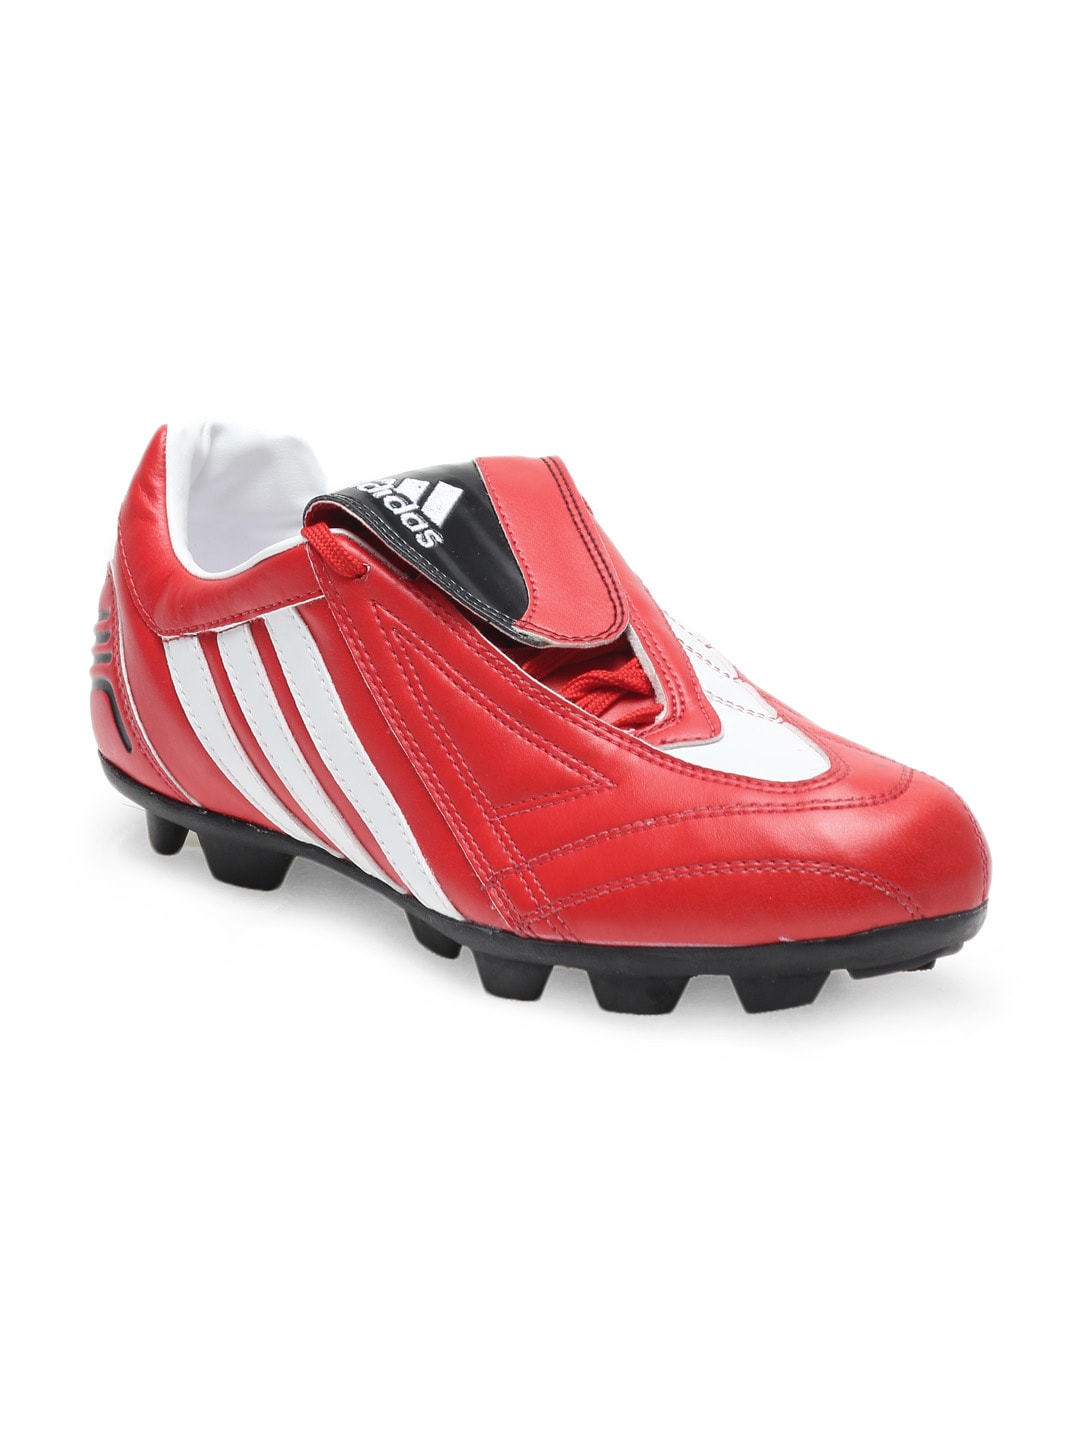 ADIDAS Men Red Pre L Boot Sports Shoes